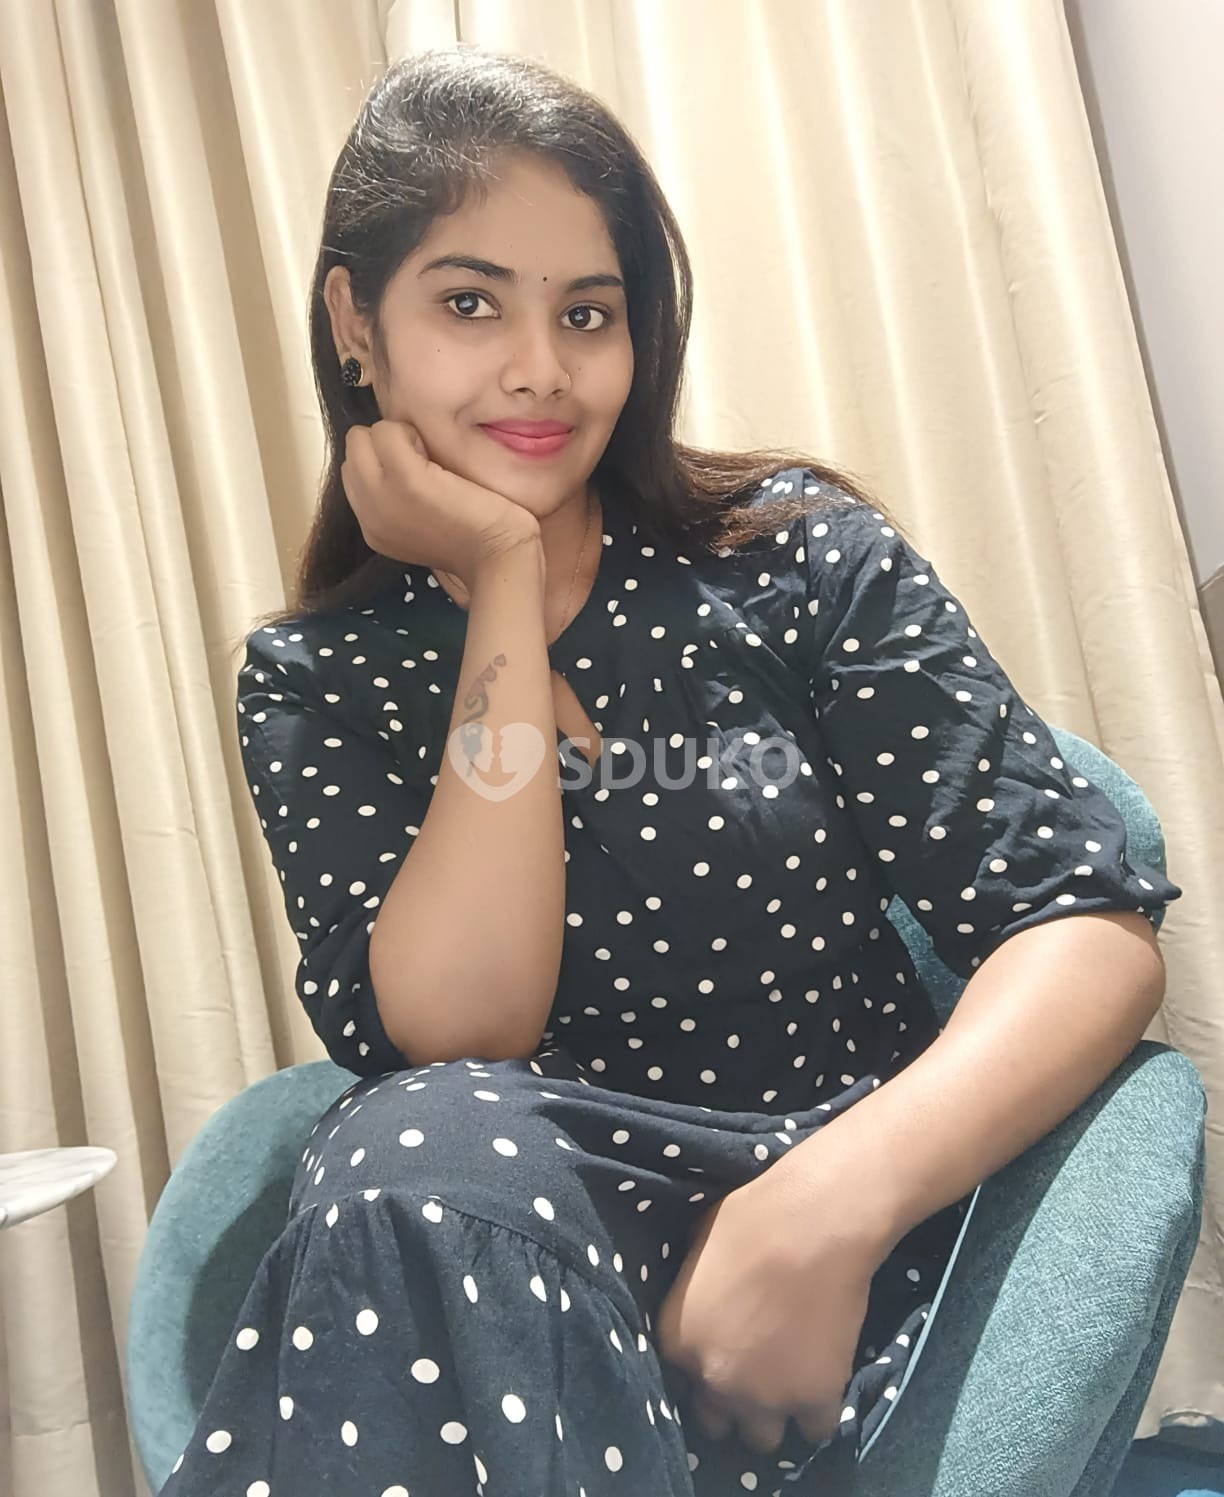 Tirupati the most demanded Vvip genuine High profile college girls available for doorstep incall outcall full safe and s